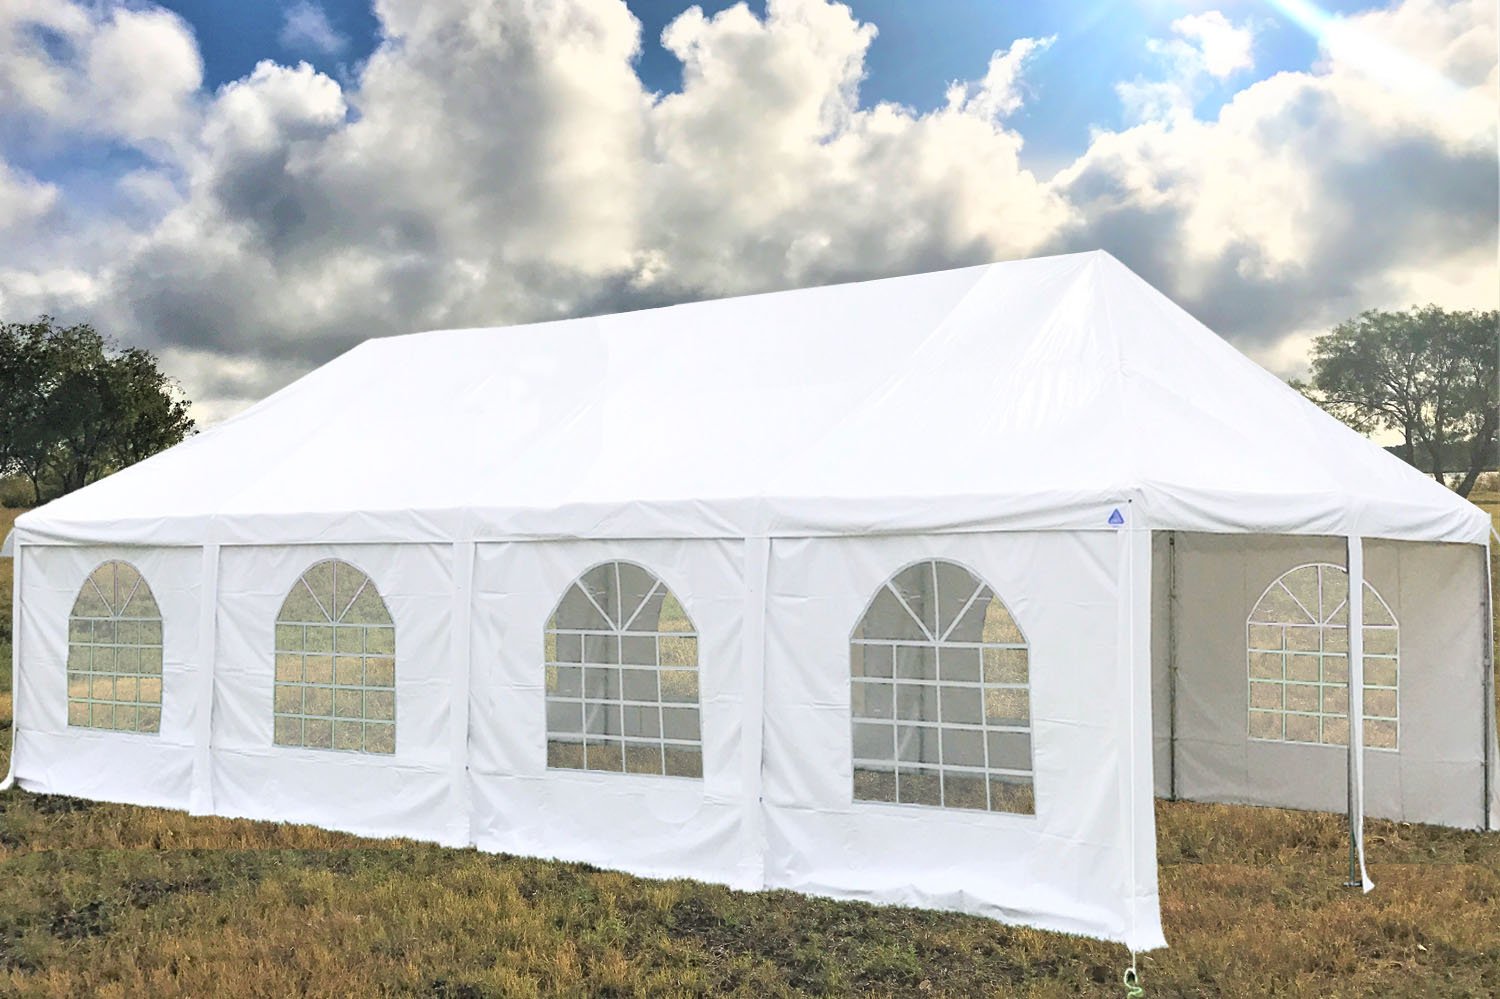 DELTA 40'x20' PE Frame Party Tent,Large Heavy Duty Wedding Tent Canopy,Outdoor Commercial Event Shelter Gazebo,Waterproof Top,Galvanized Steel Poles,Storage Bags